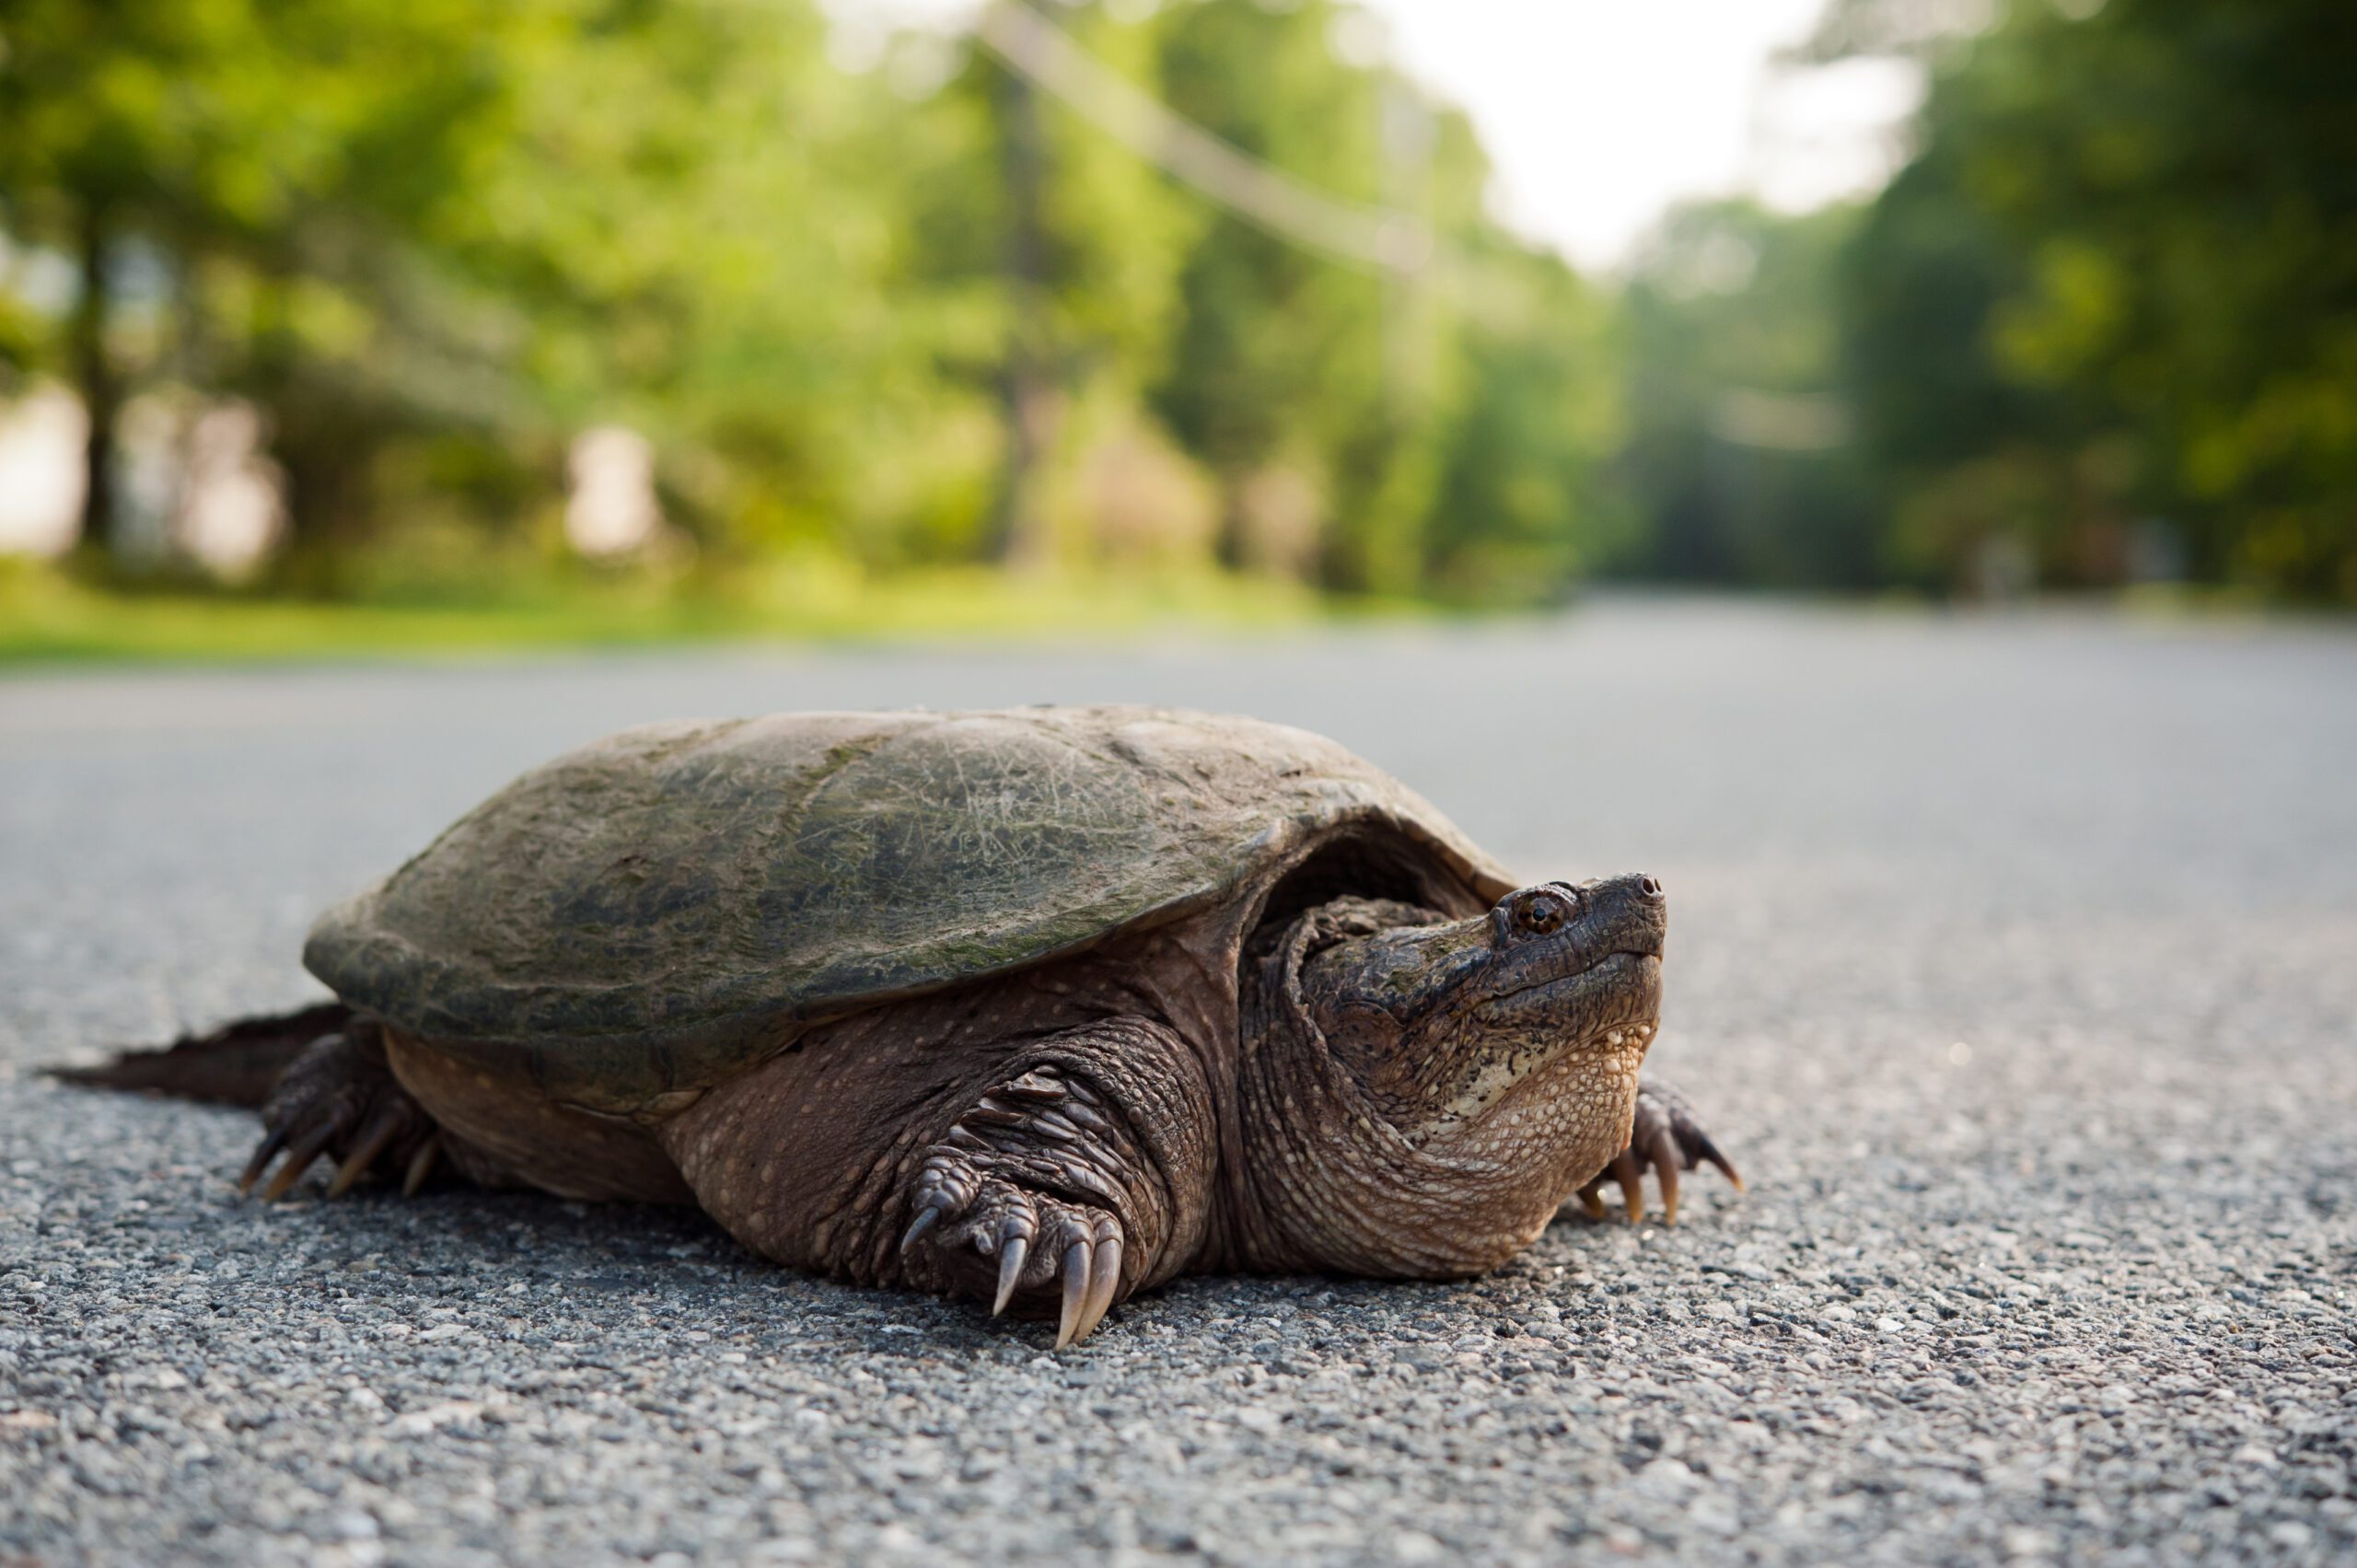 Snapping turtle in the road